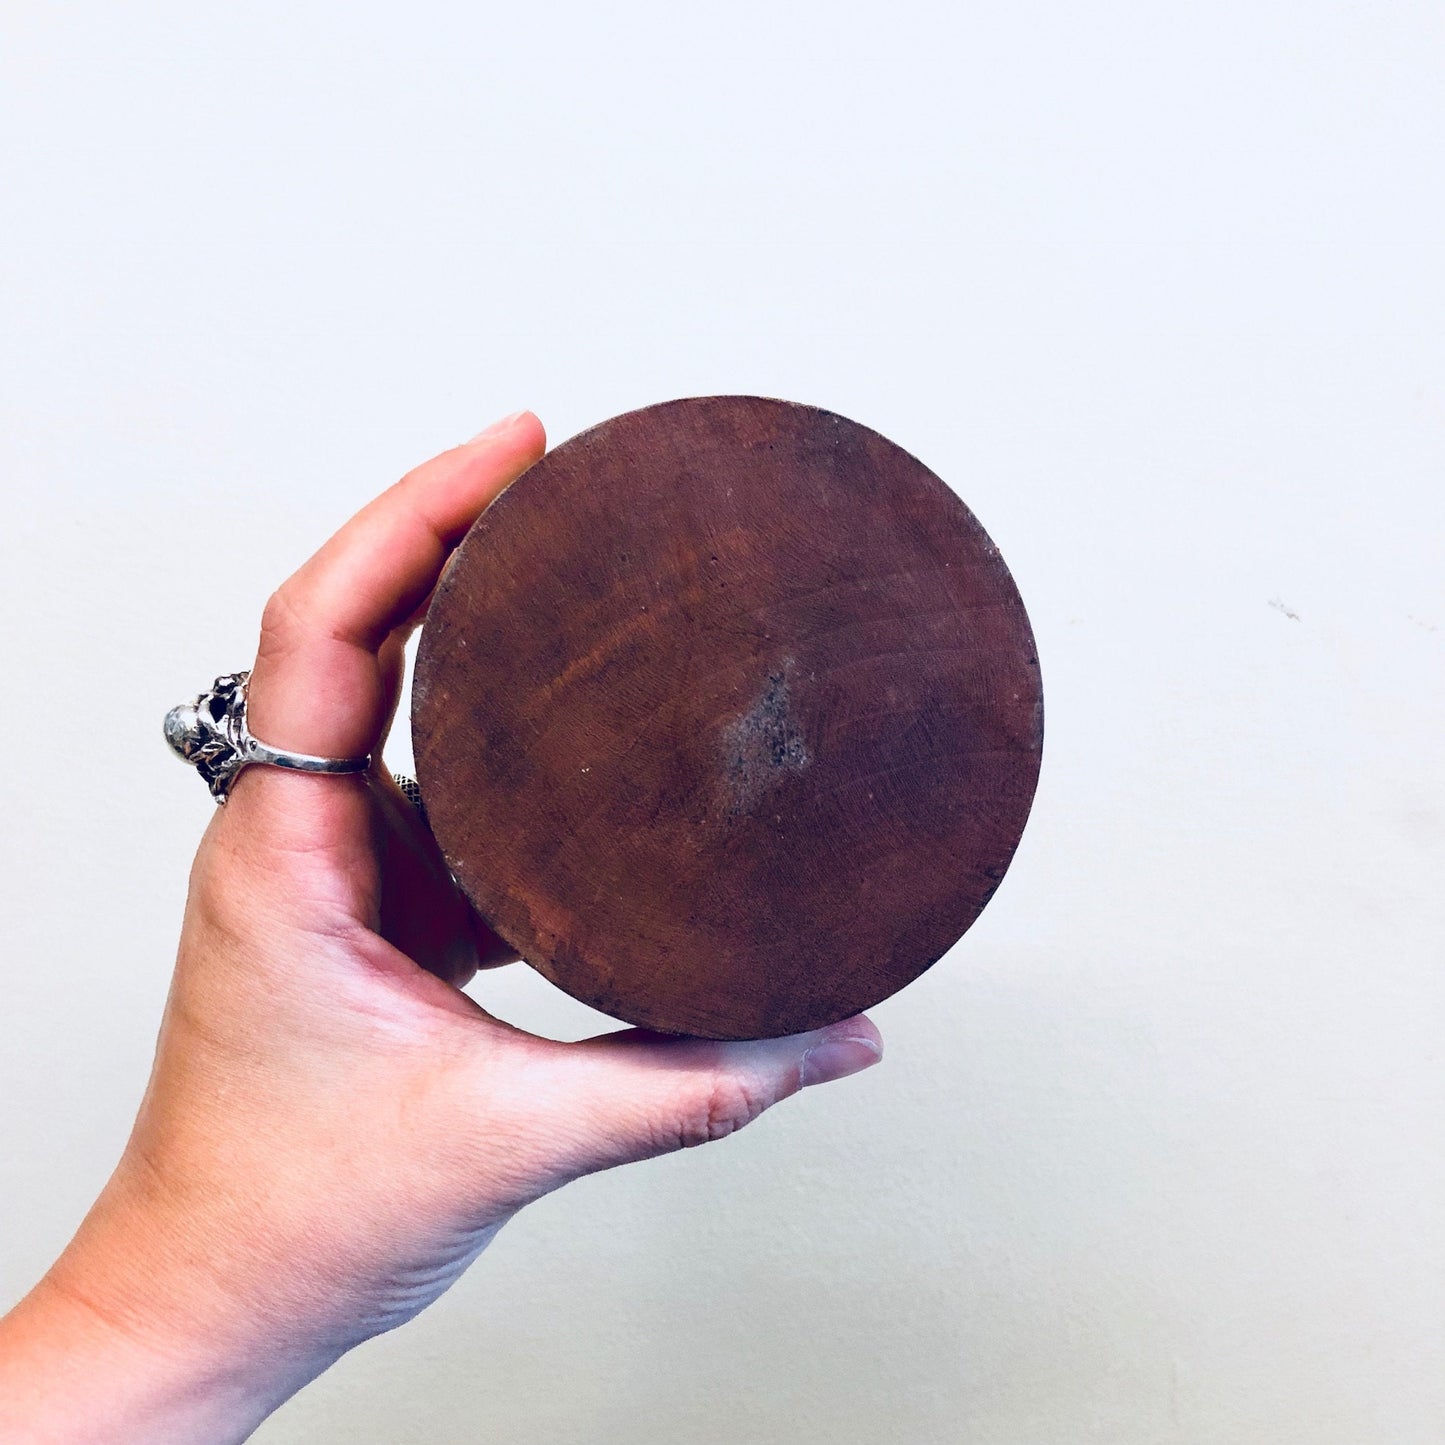 Hand holding a round, wooden carved box with a sun face design on the lid against a plain white background.